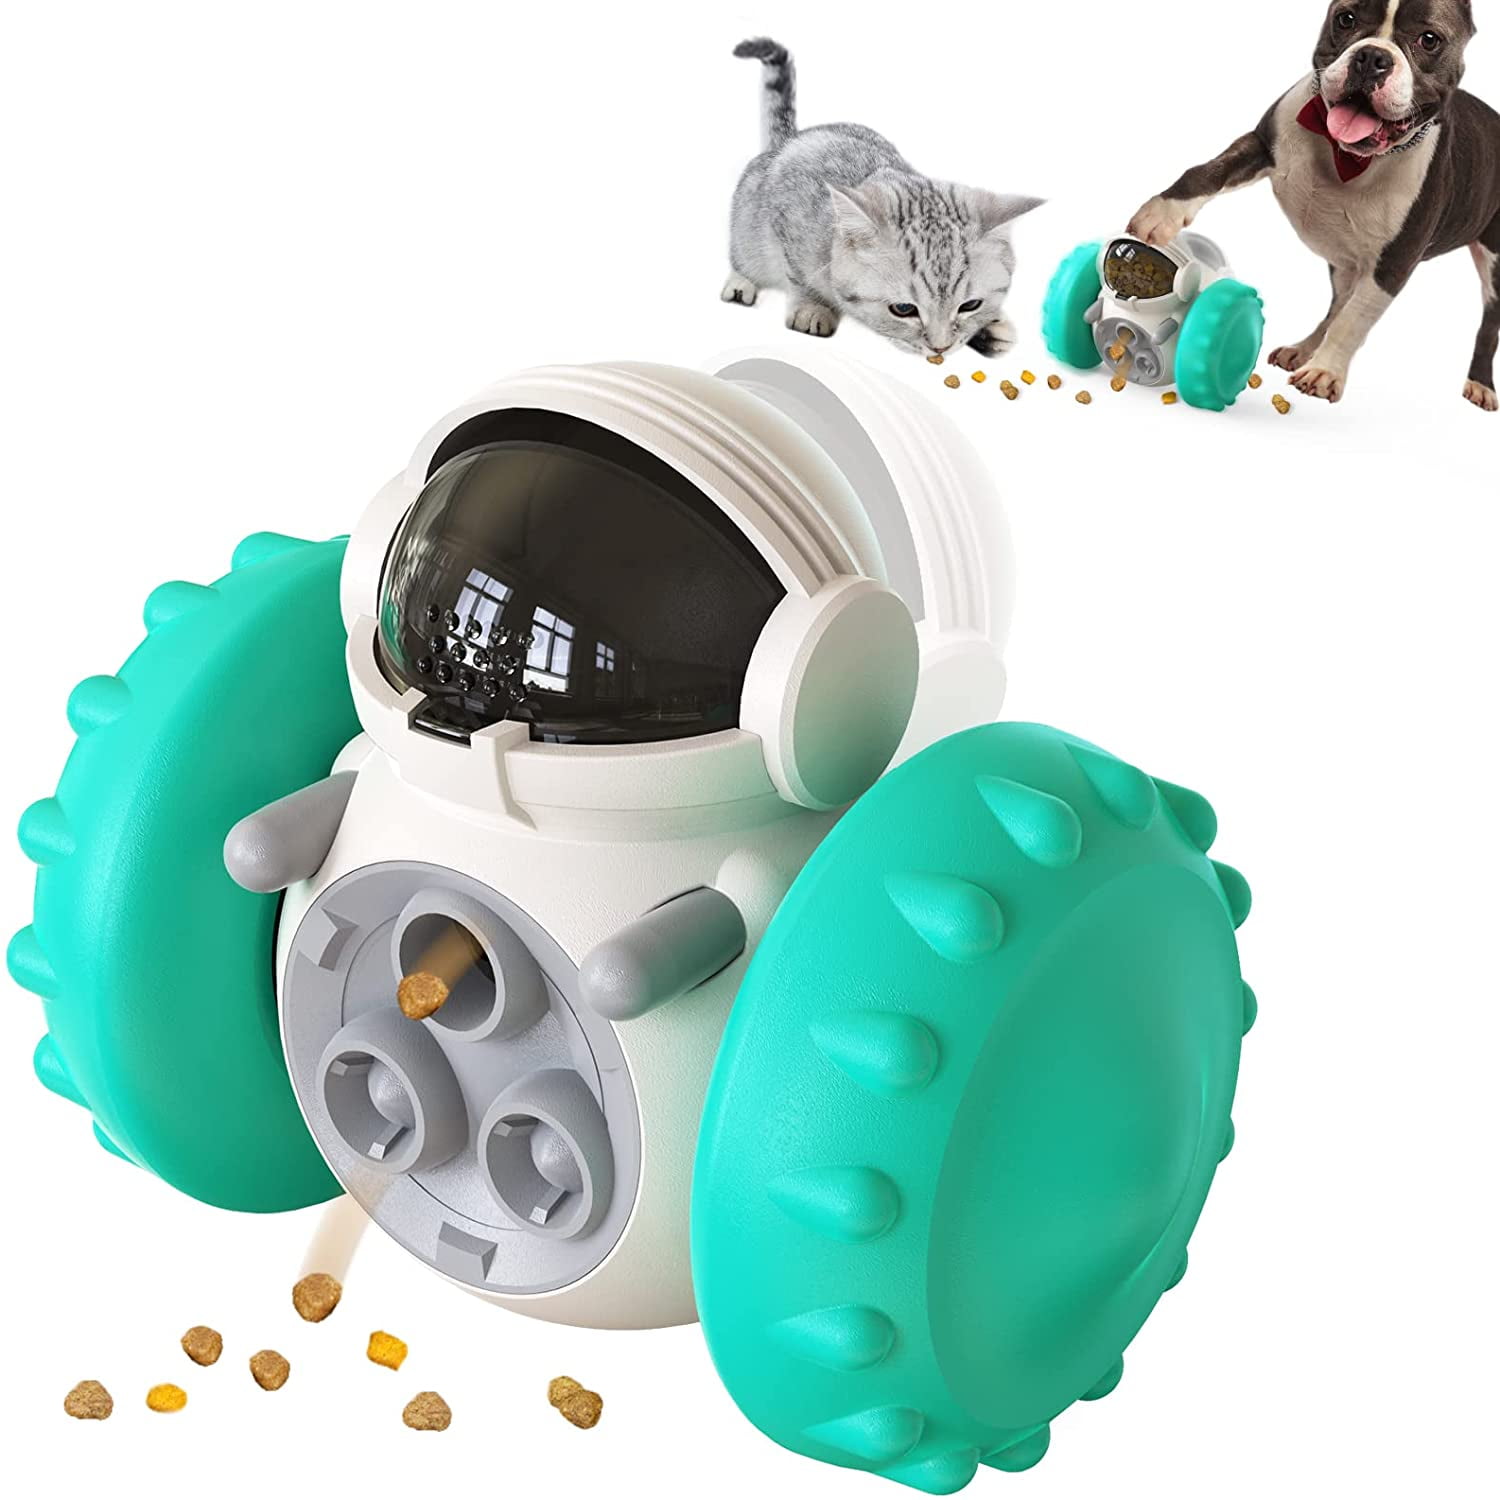 The educational pet toys Roly-poly Leaky feeder Funny dog Feeding